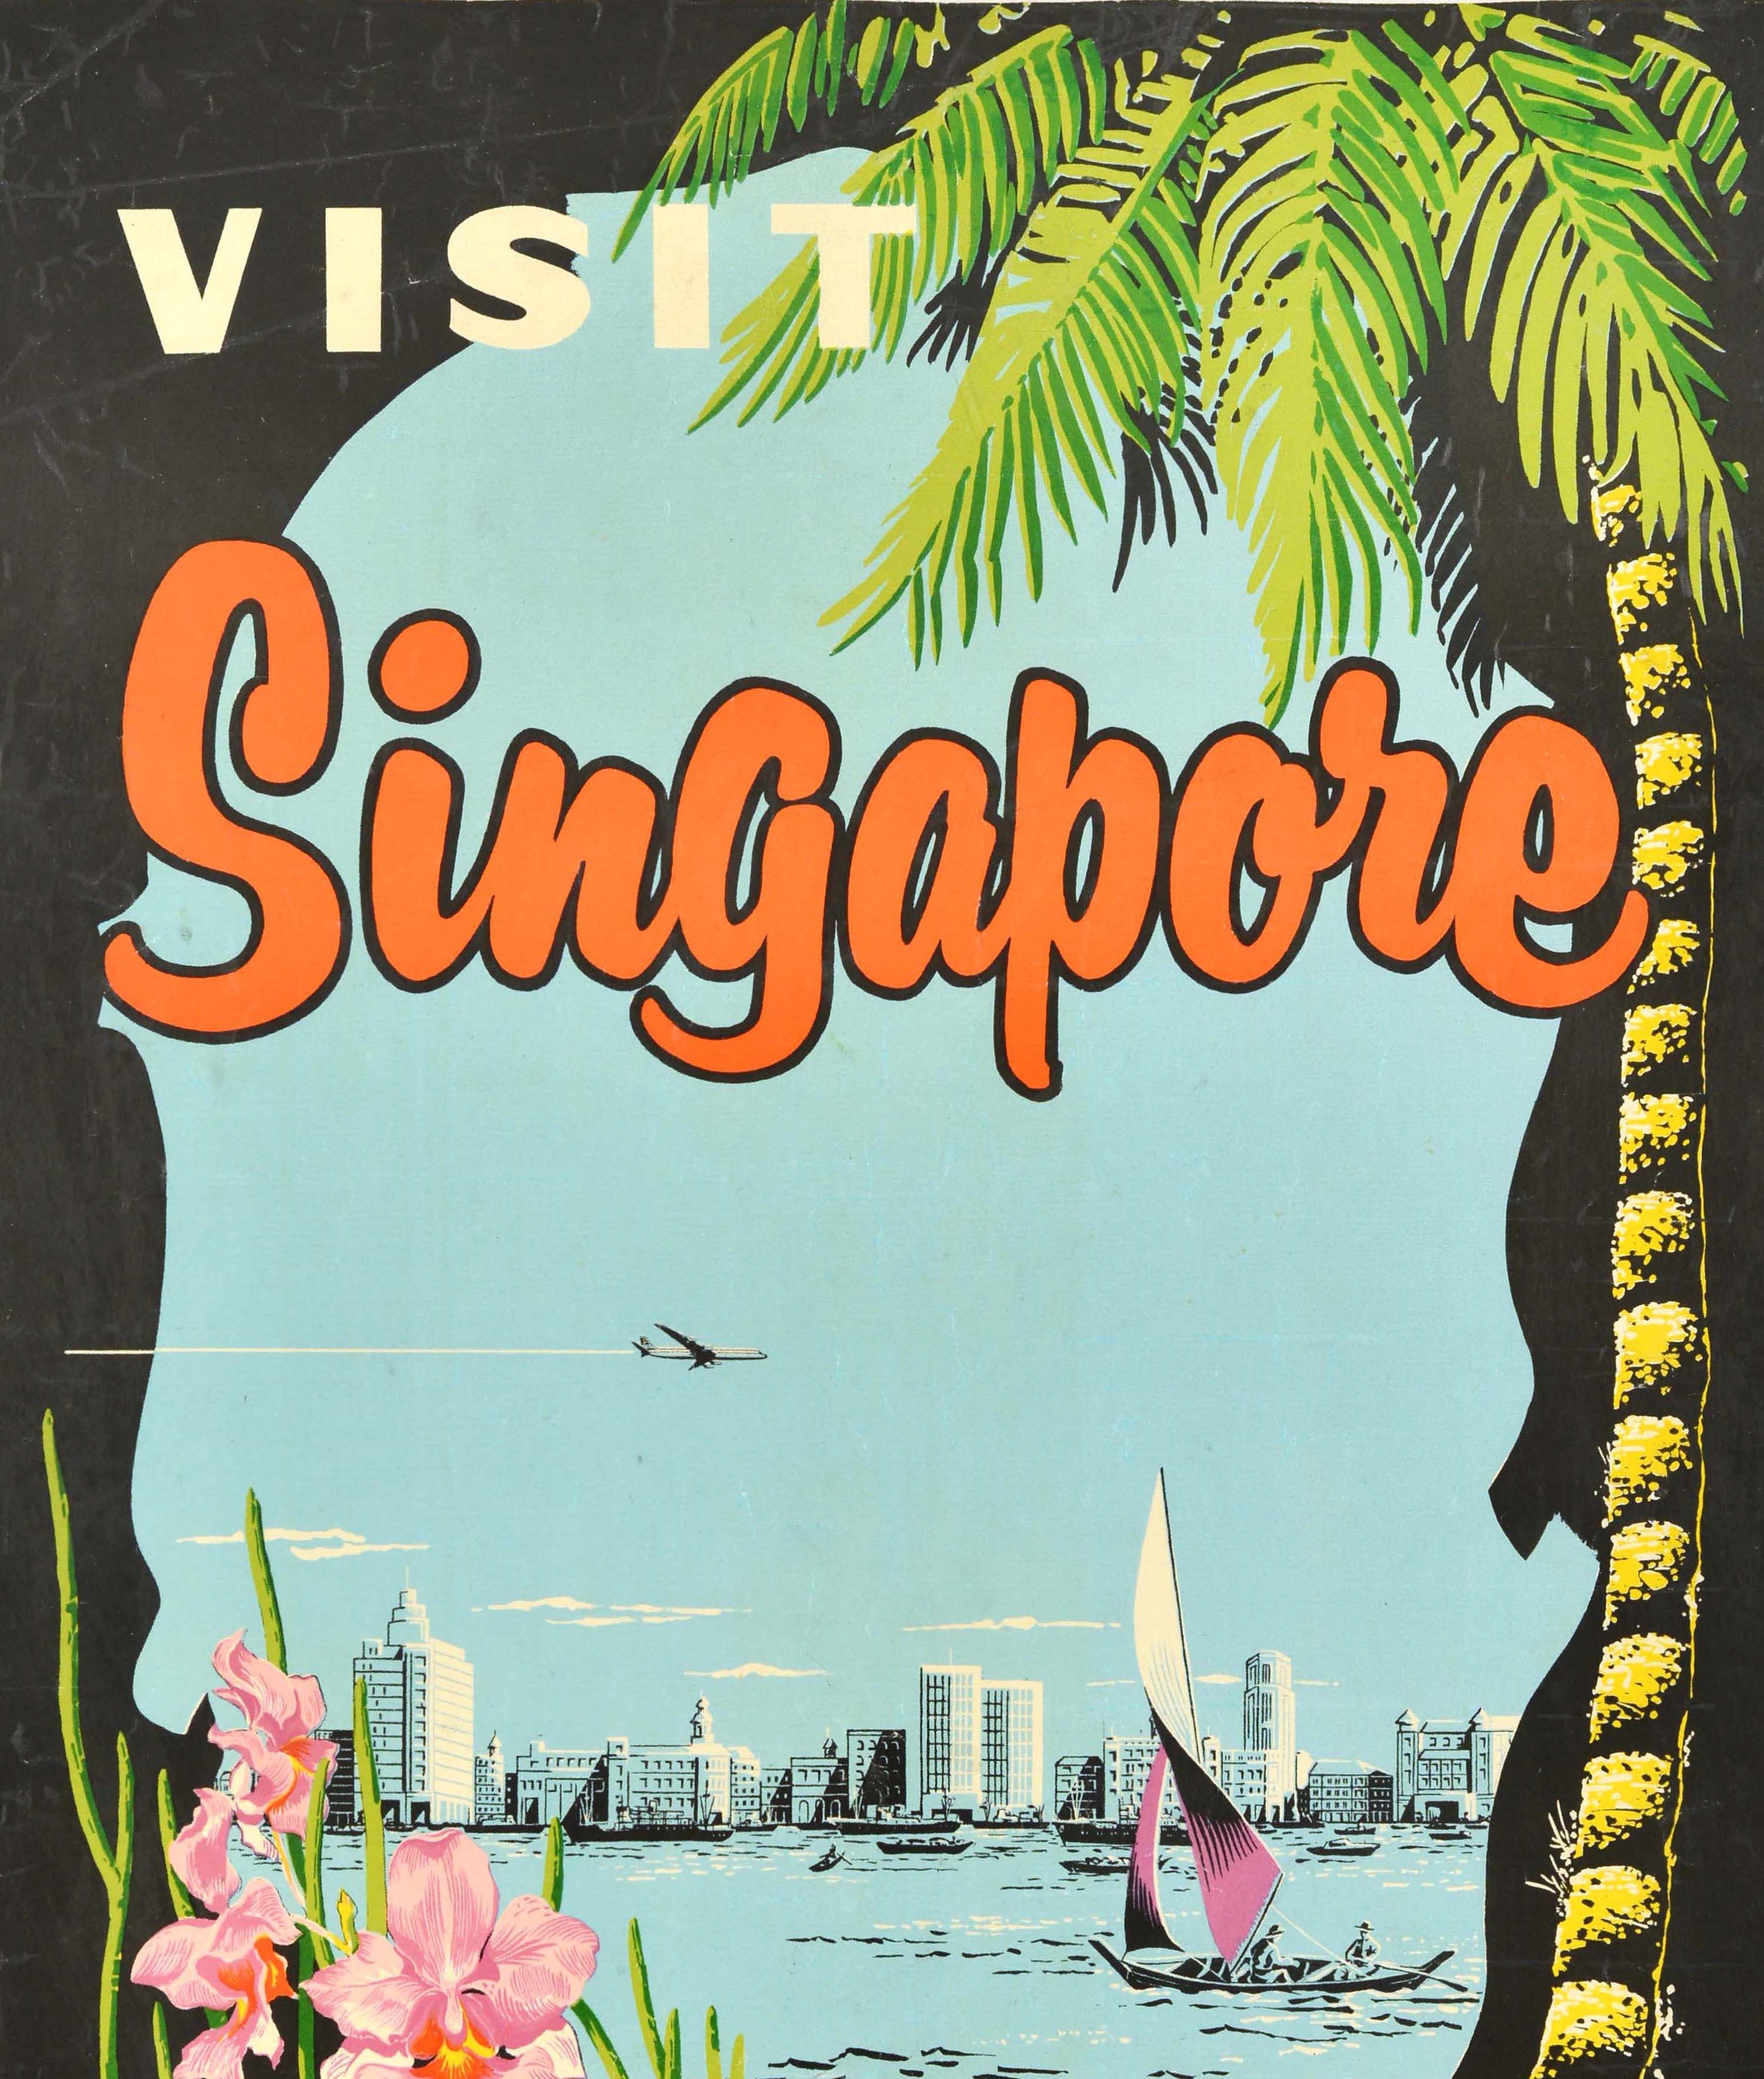 Original vintage travel poster - Visit Singapore The Gay Heart of South East Asia - featuring a great illustration of a sailing boat in front of other boats and the city buildings in the distance, a plane flying above with the view framed by pink